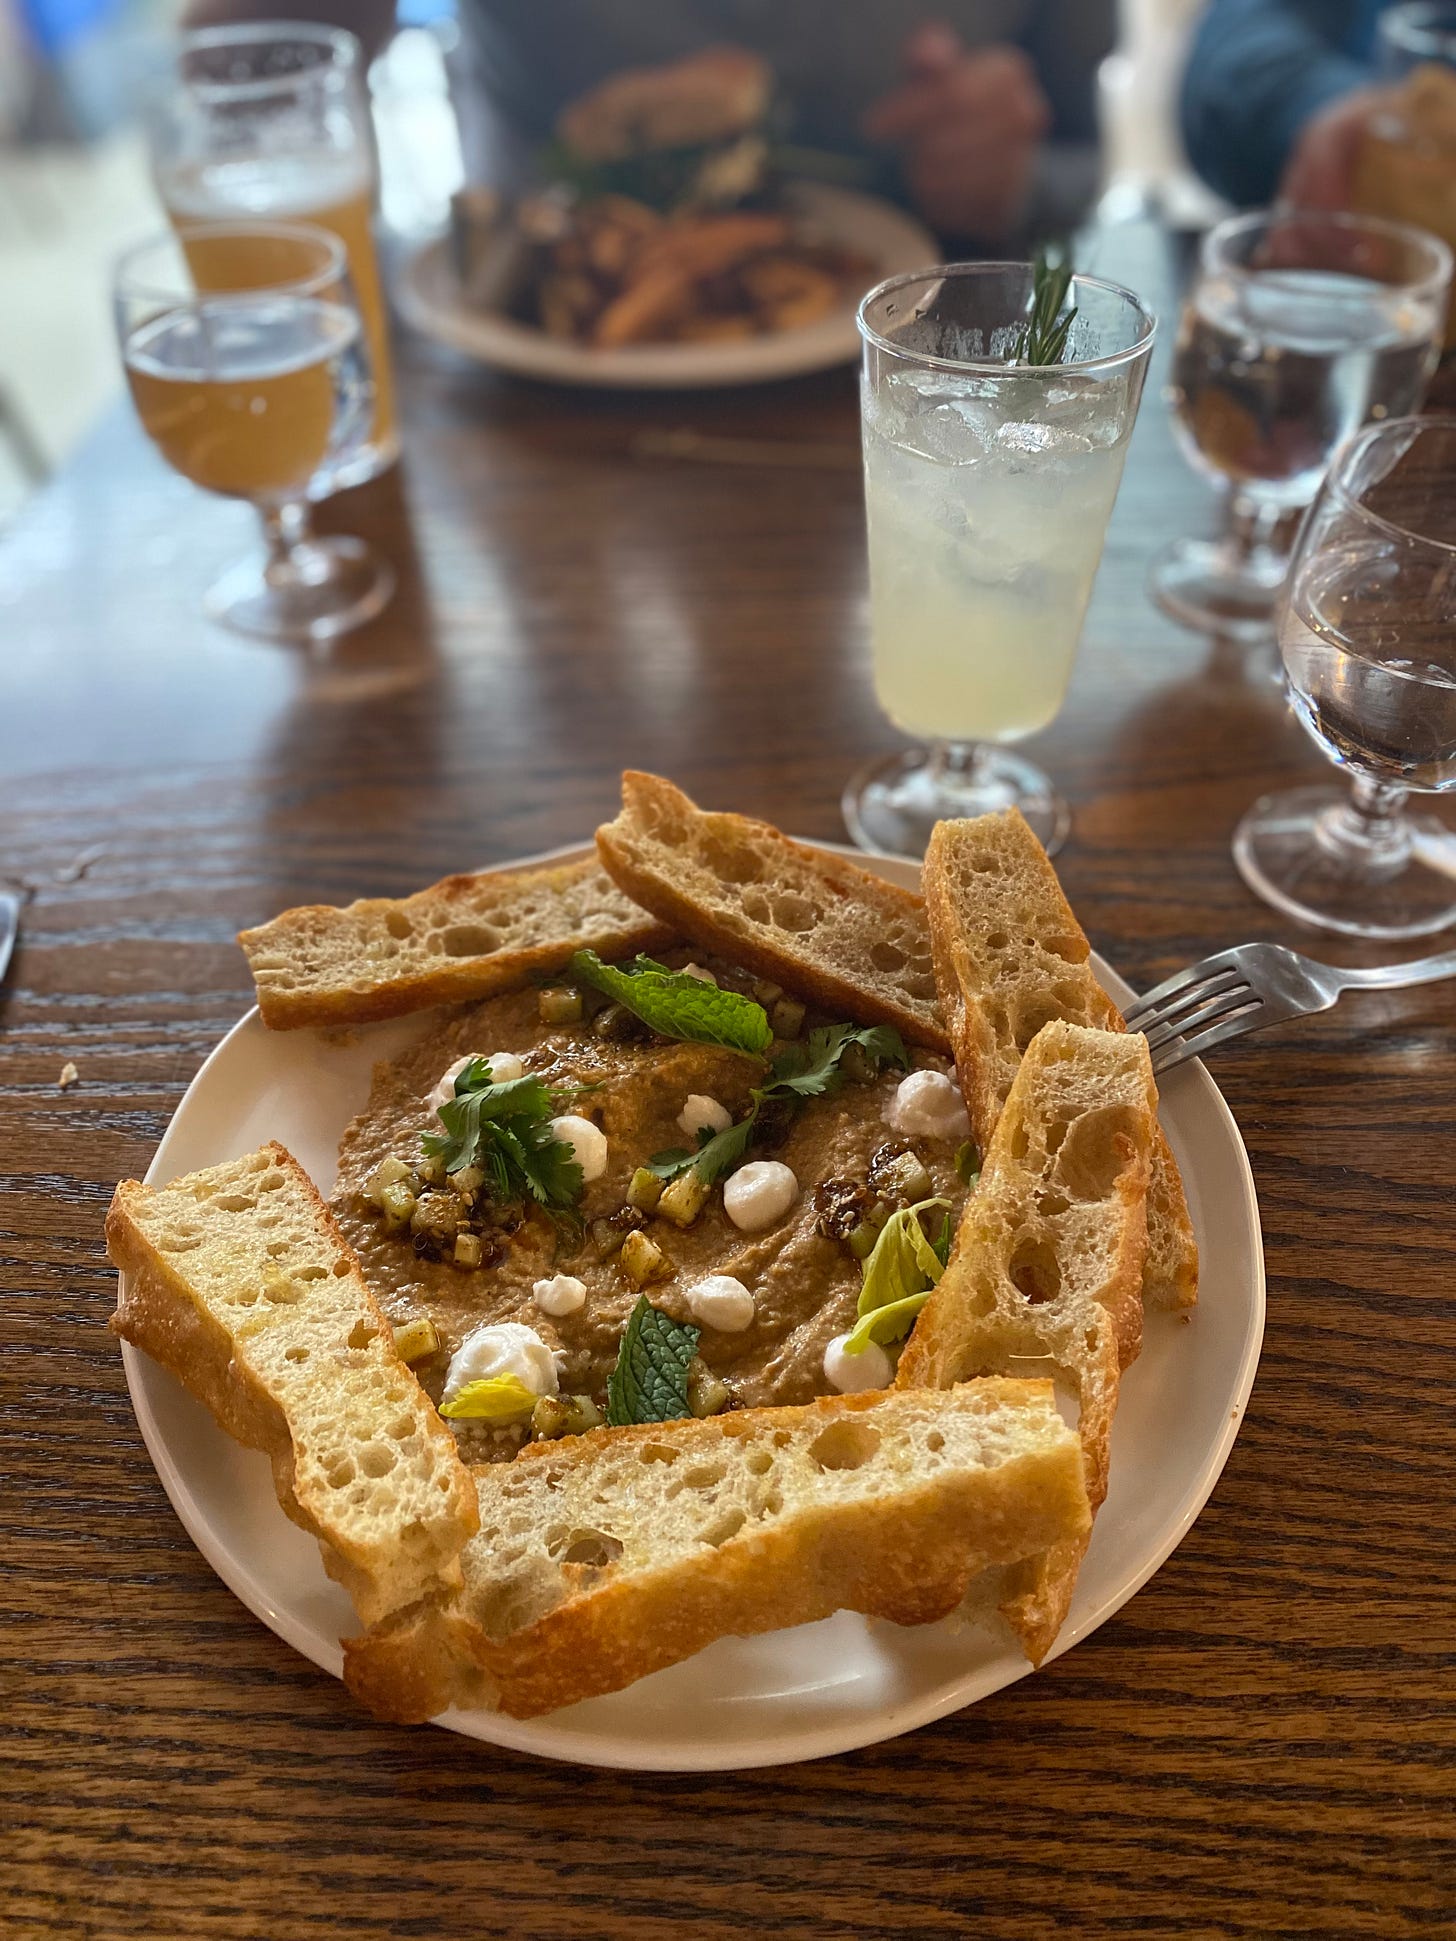 A white plate with the dip described above, surrounded by slices of crusty bread. In the background is a gin and lime soda with rosemary.